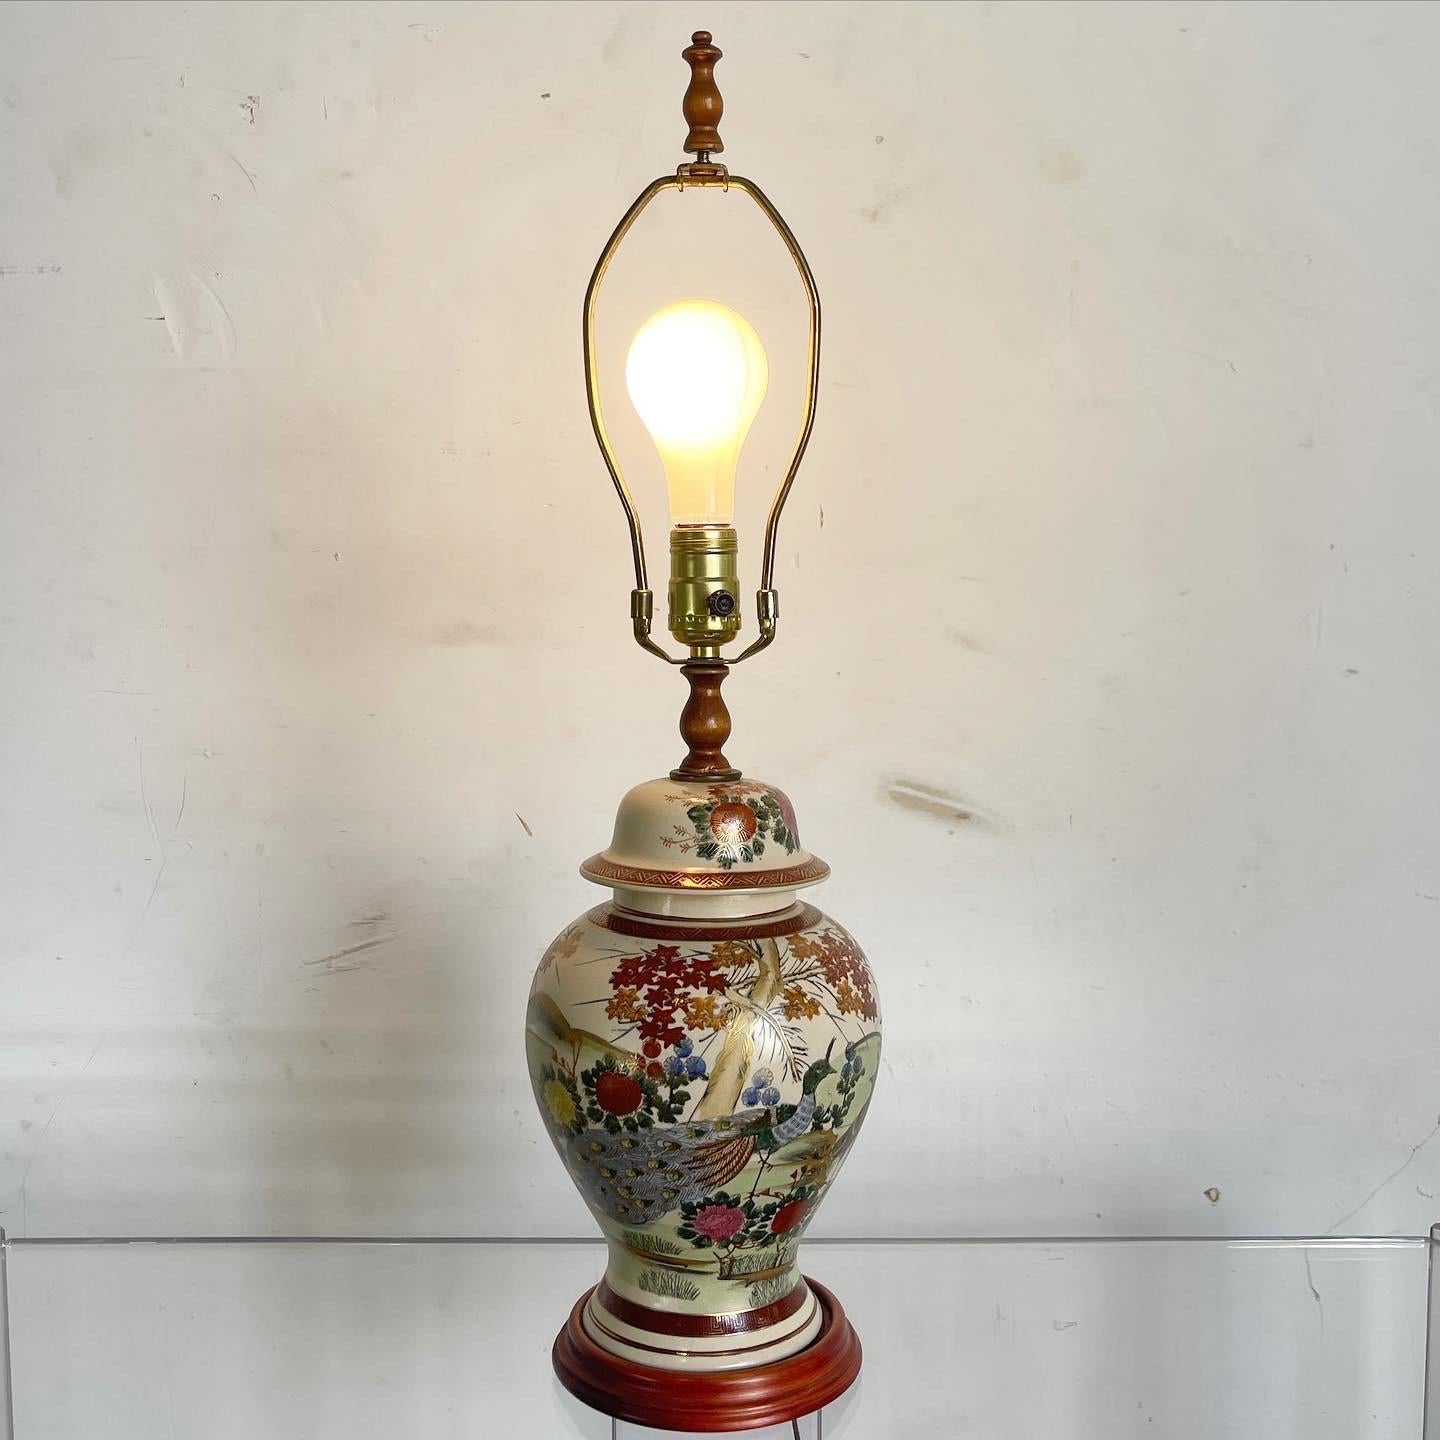 Experience unmatched elegance with the Chinese Hand Painted Ceramic Table Lamp. This exceptional piece seamlessly fuses ceramic and wood, adorned with intricate designs, to create a sophisticated ambiance of natural beauty and artistic